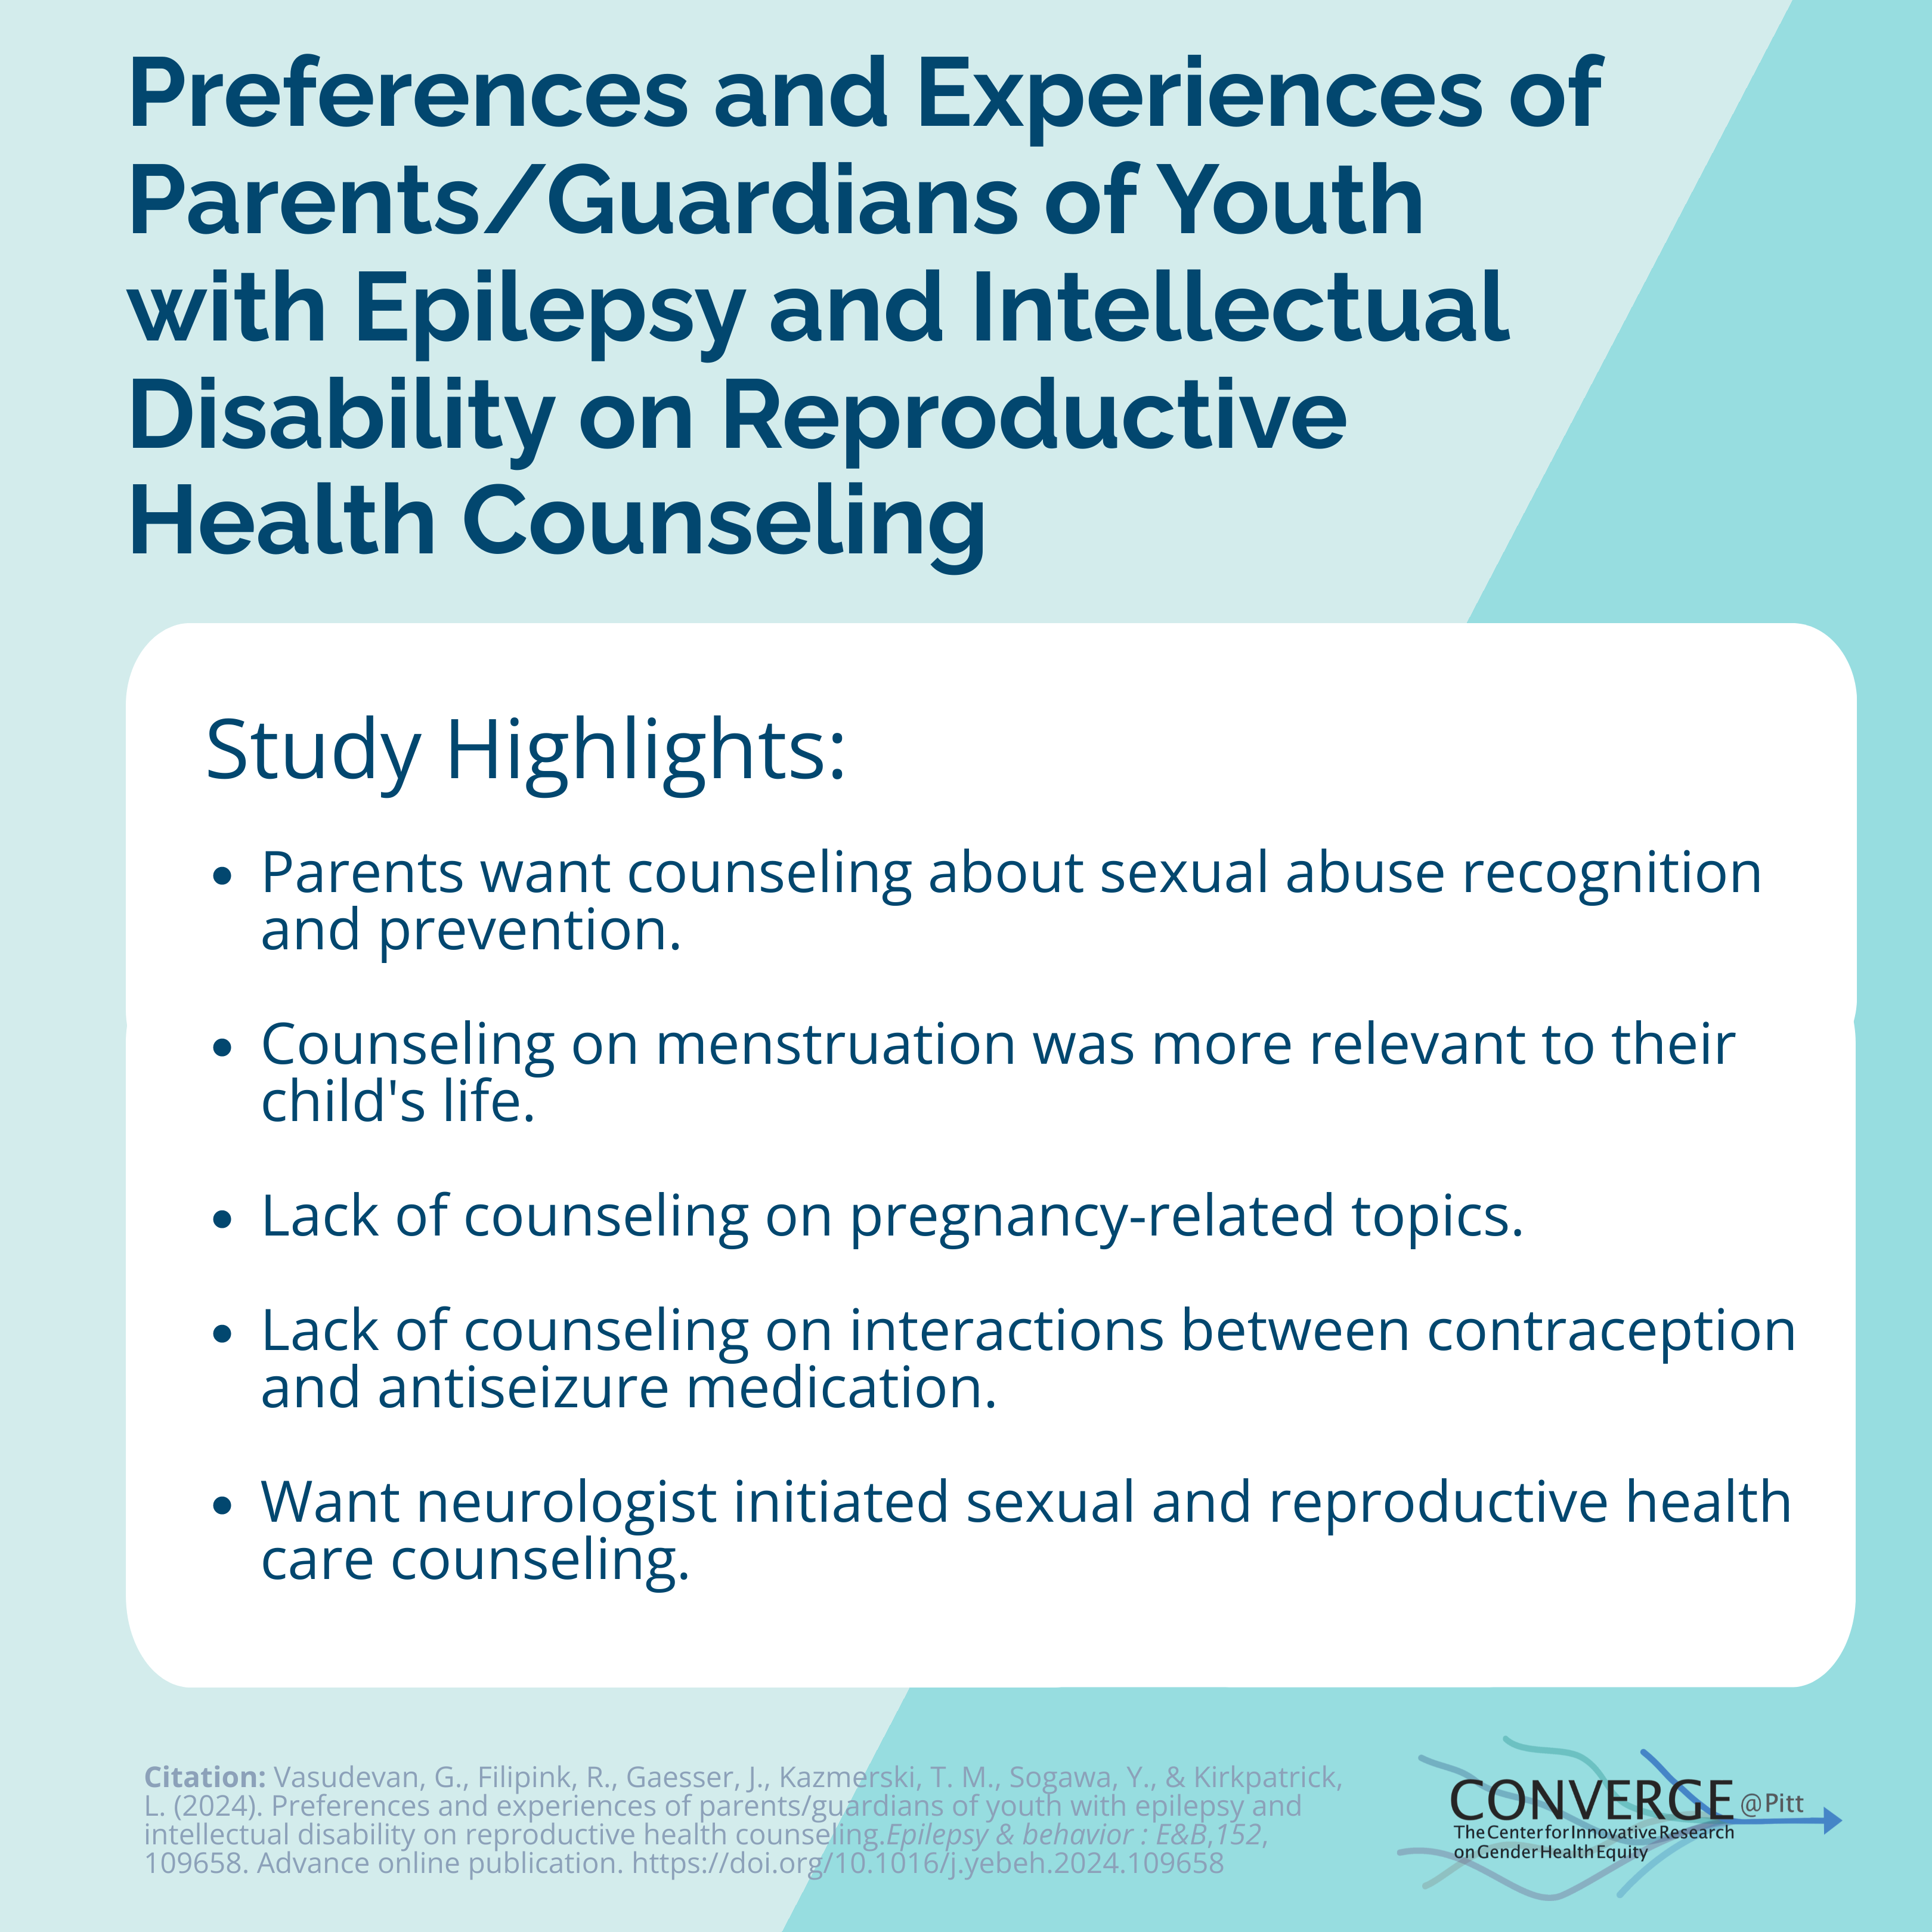 Preferences and experiences of parents/guardians of youth with epilepsy and intellectual disability on reproductive health counseling